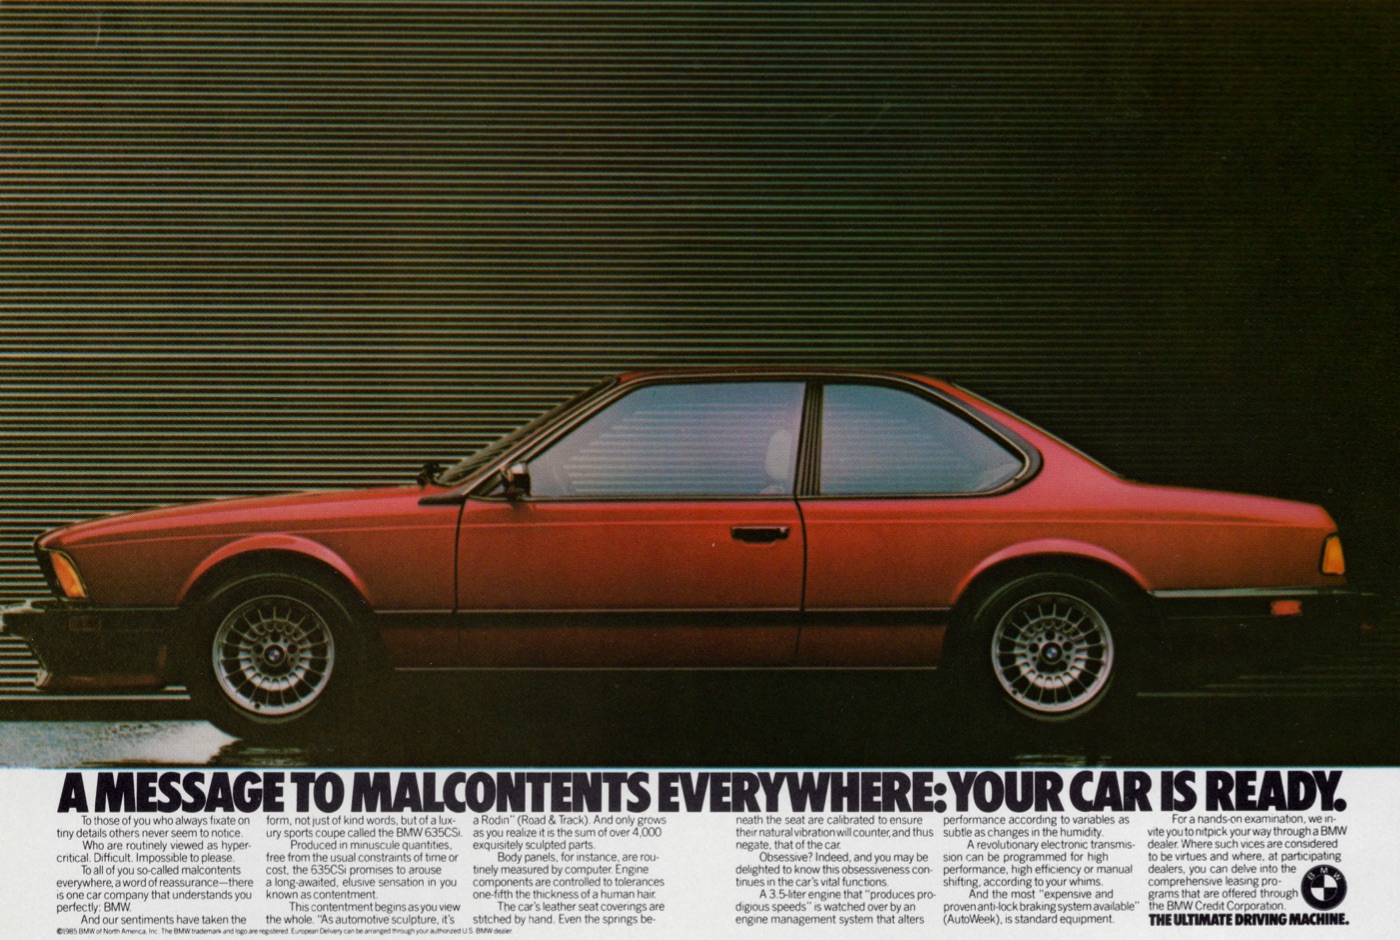 BMW: A message to malcontents everywhere: your car is ready